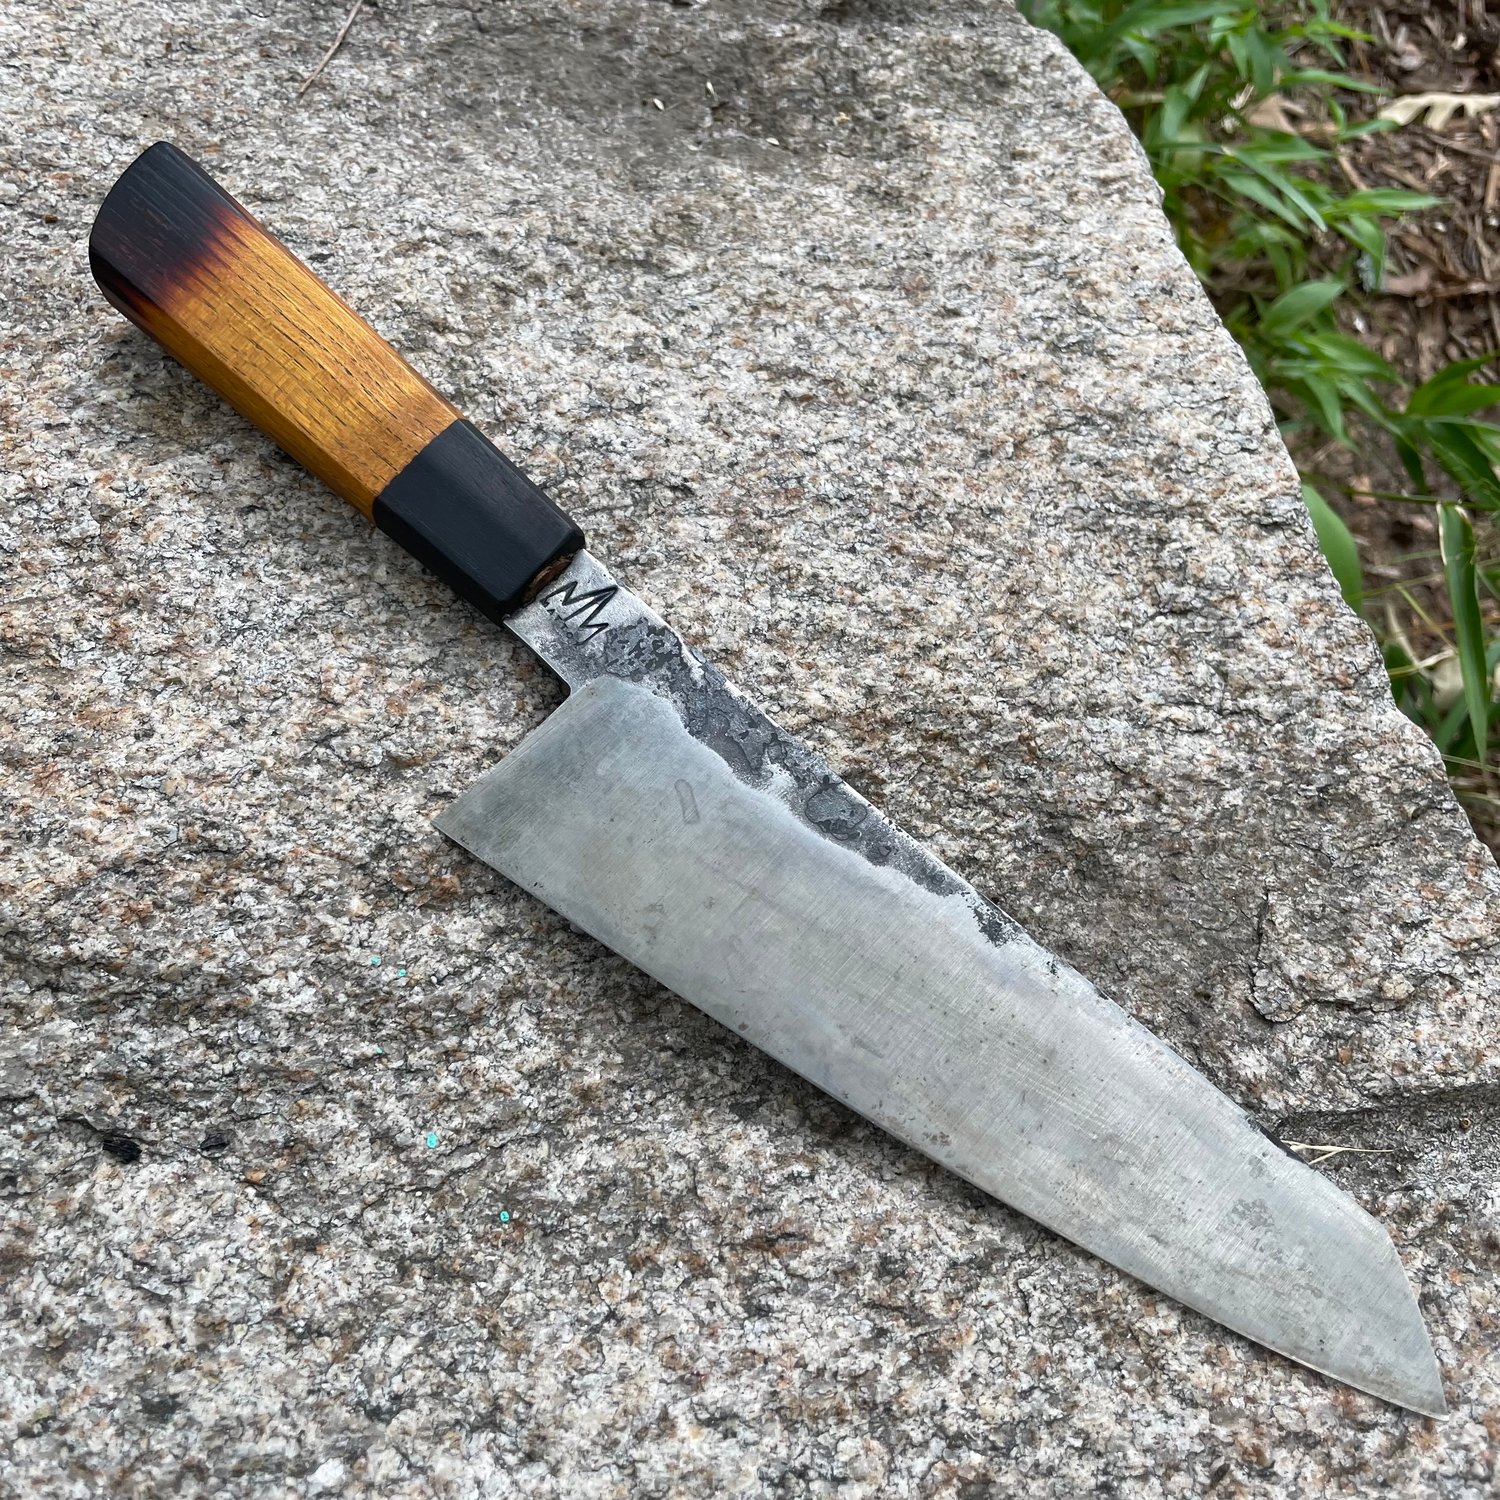 https://assets.bigcartel.com/product_images/2a8dad3f-7011-461d-95d6-f321d7dd2d22/available-chefs-knives.jpg?auto=format&fit=max&w=1500